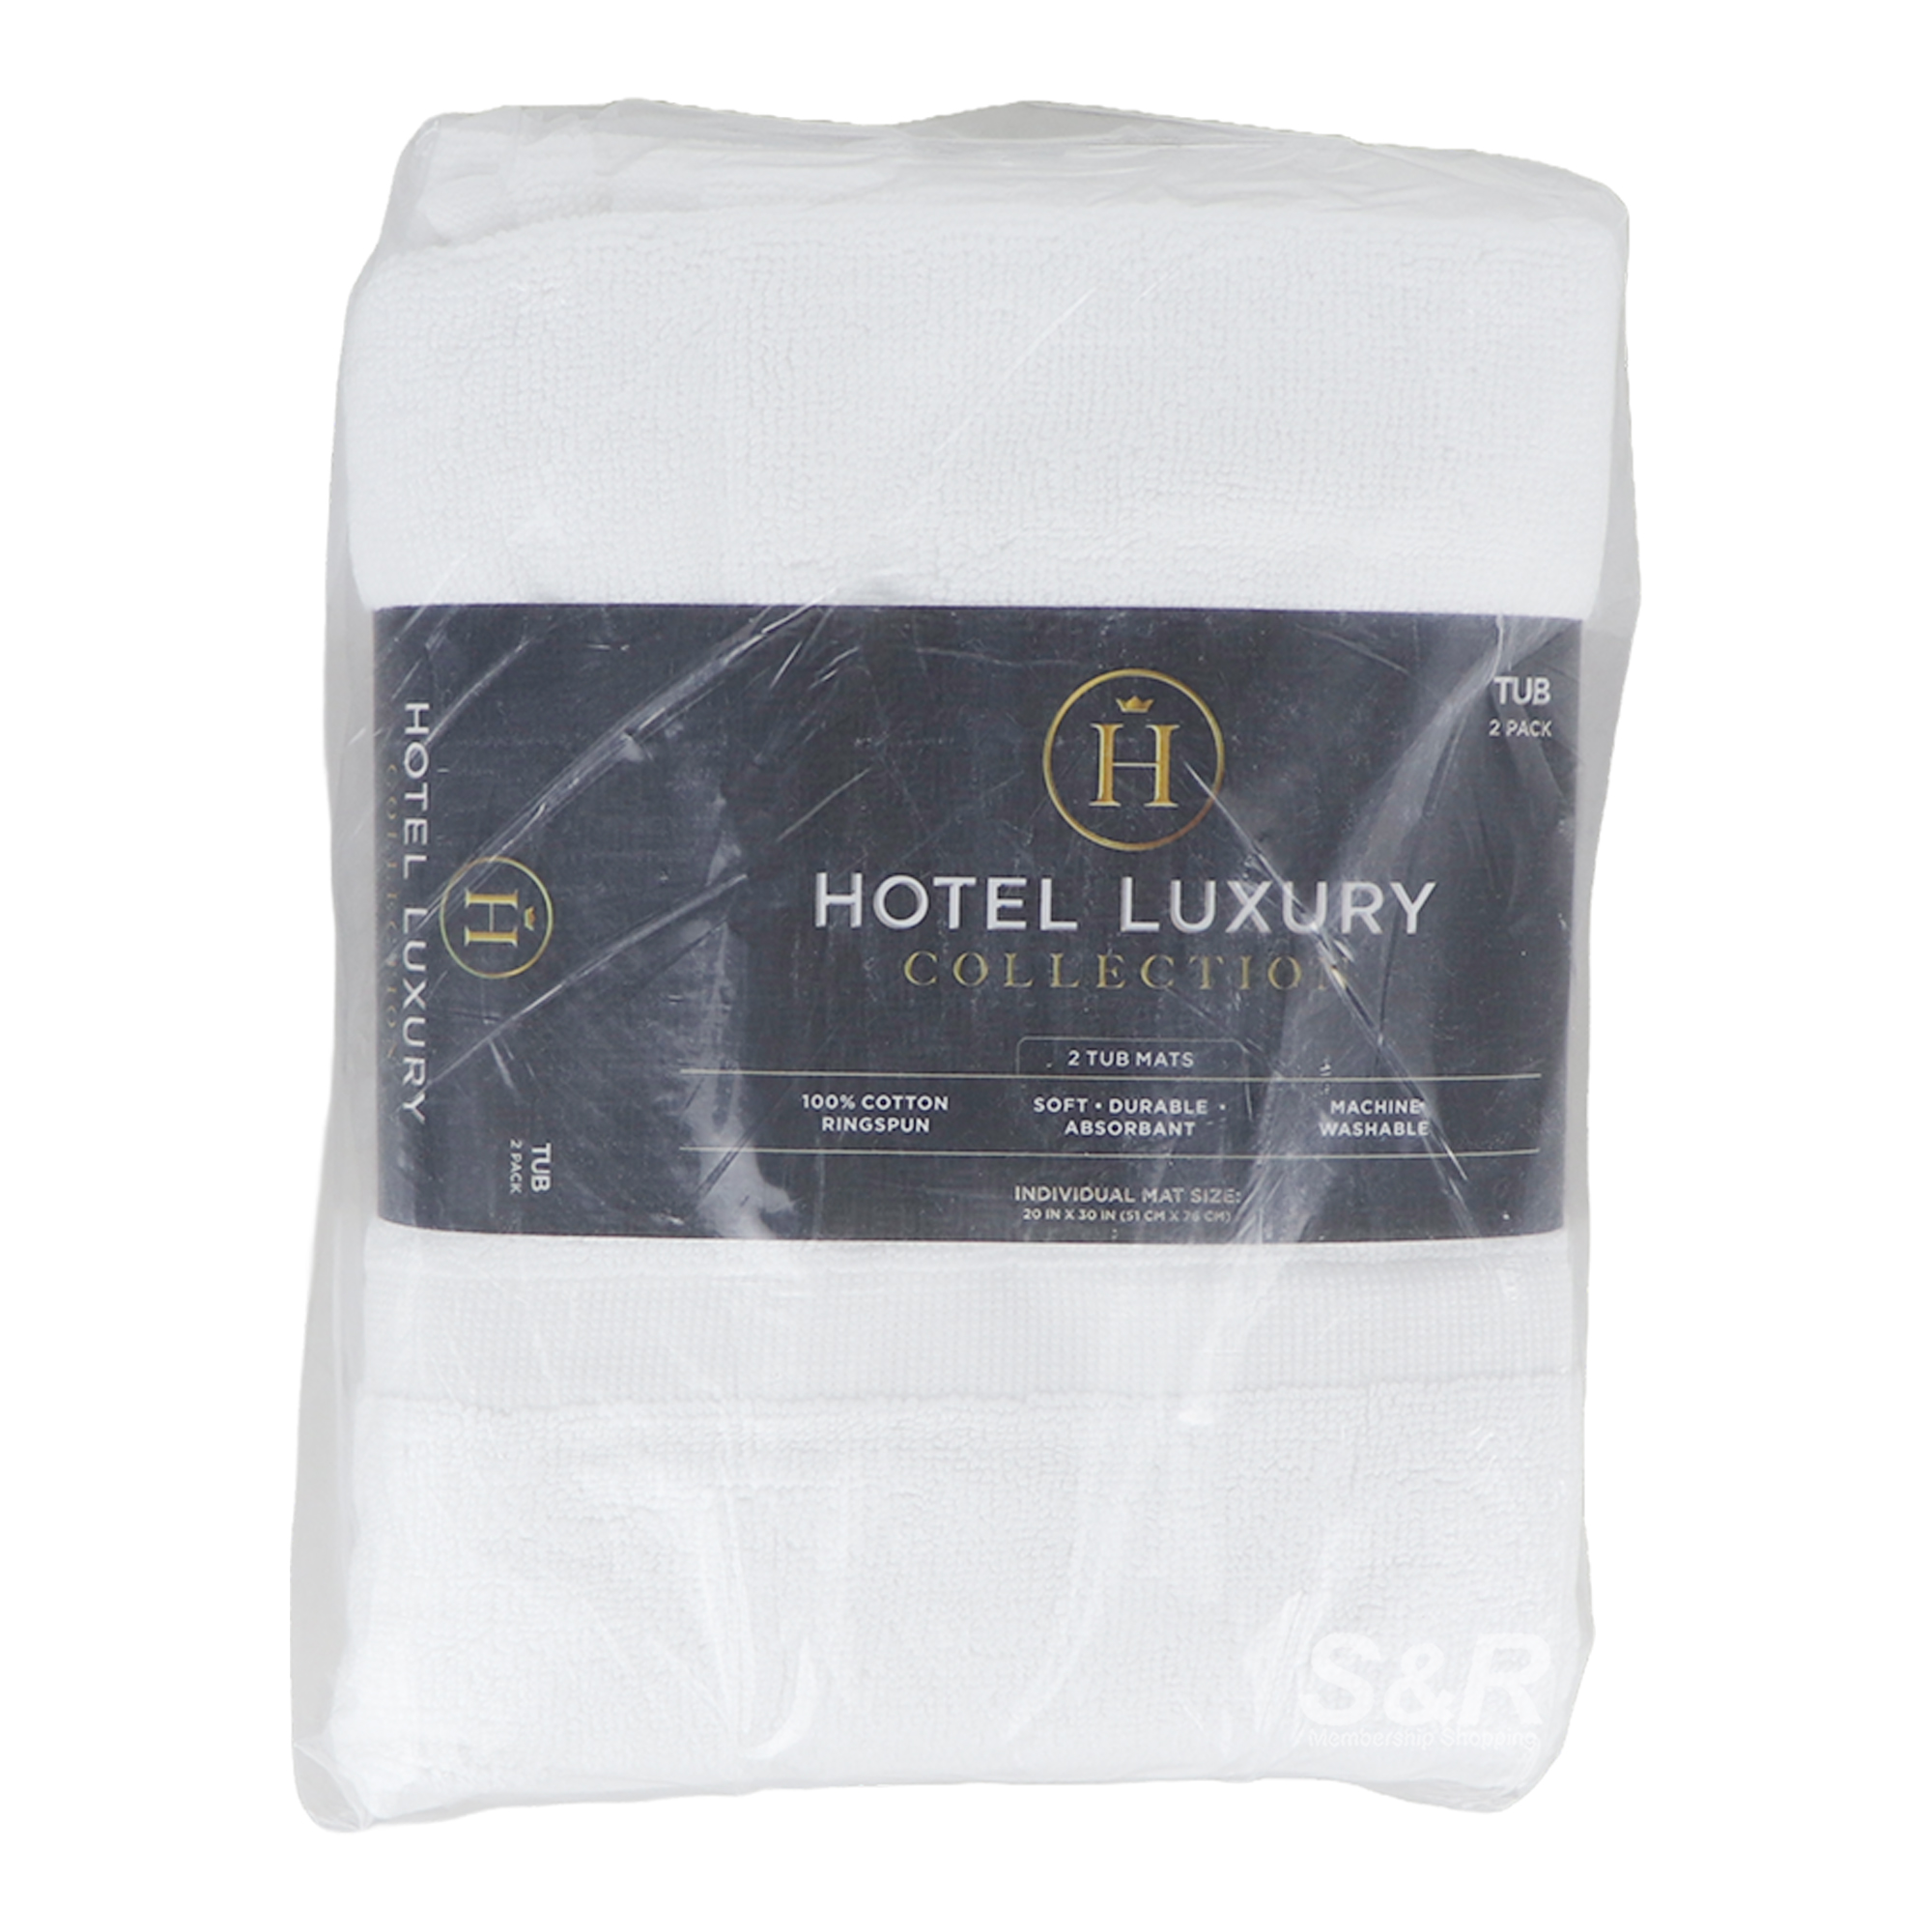 Hotel Luxury Collection Tub Mat 2pcs